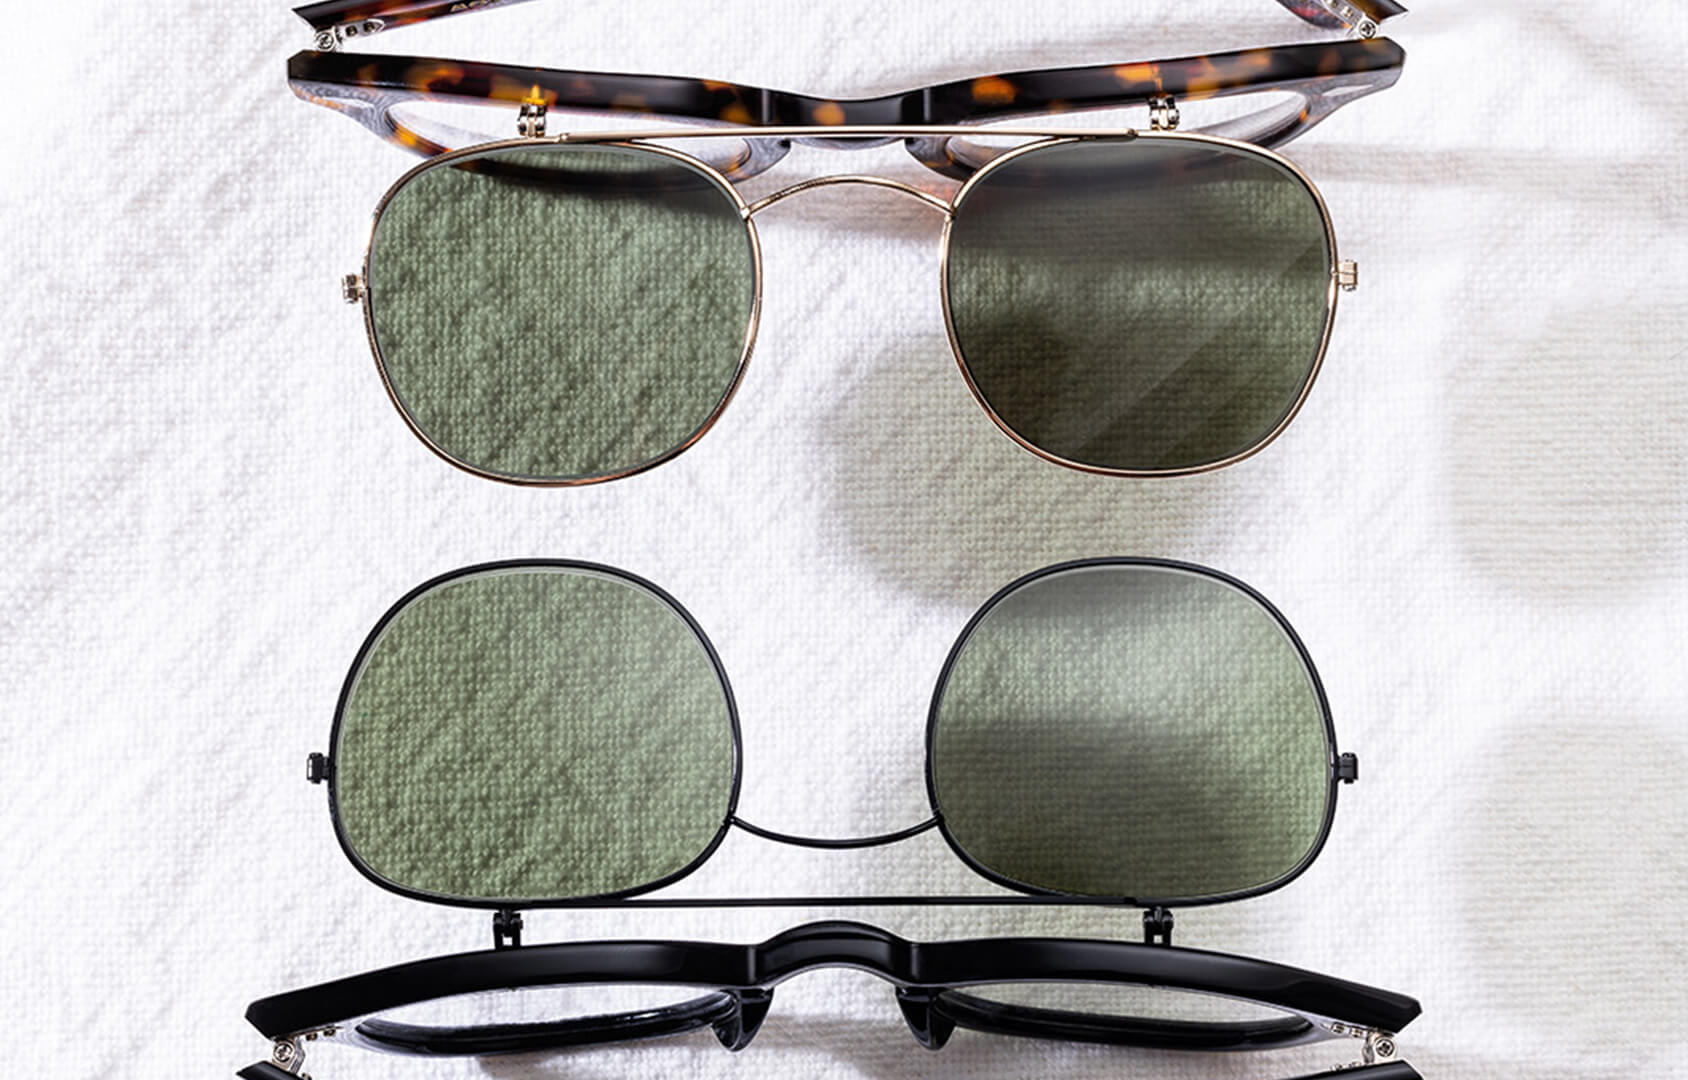 The Wall Street Journal Reports the Rise of Flip-Up Sunglasses